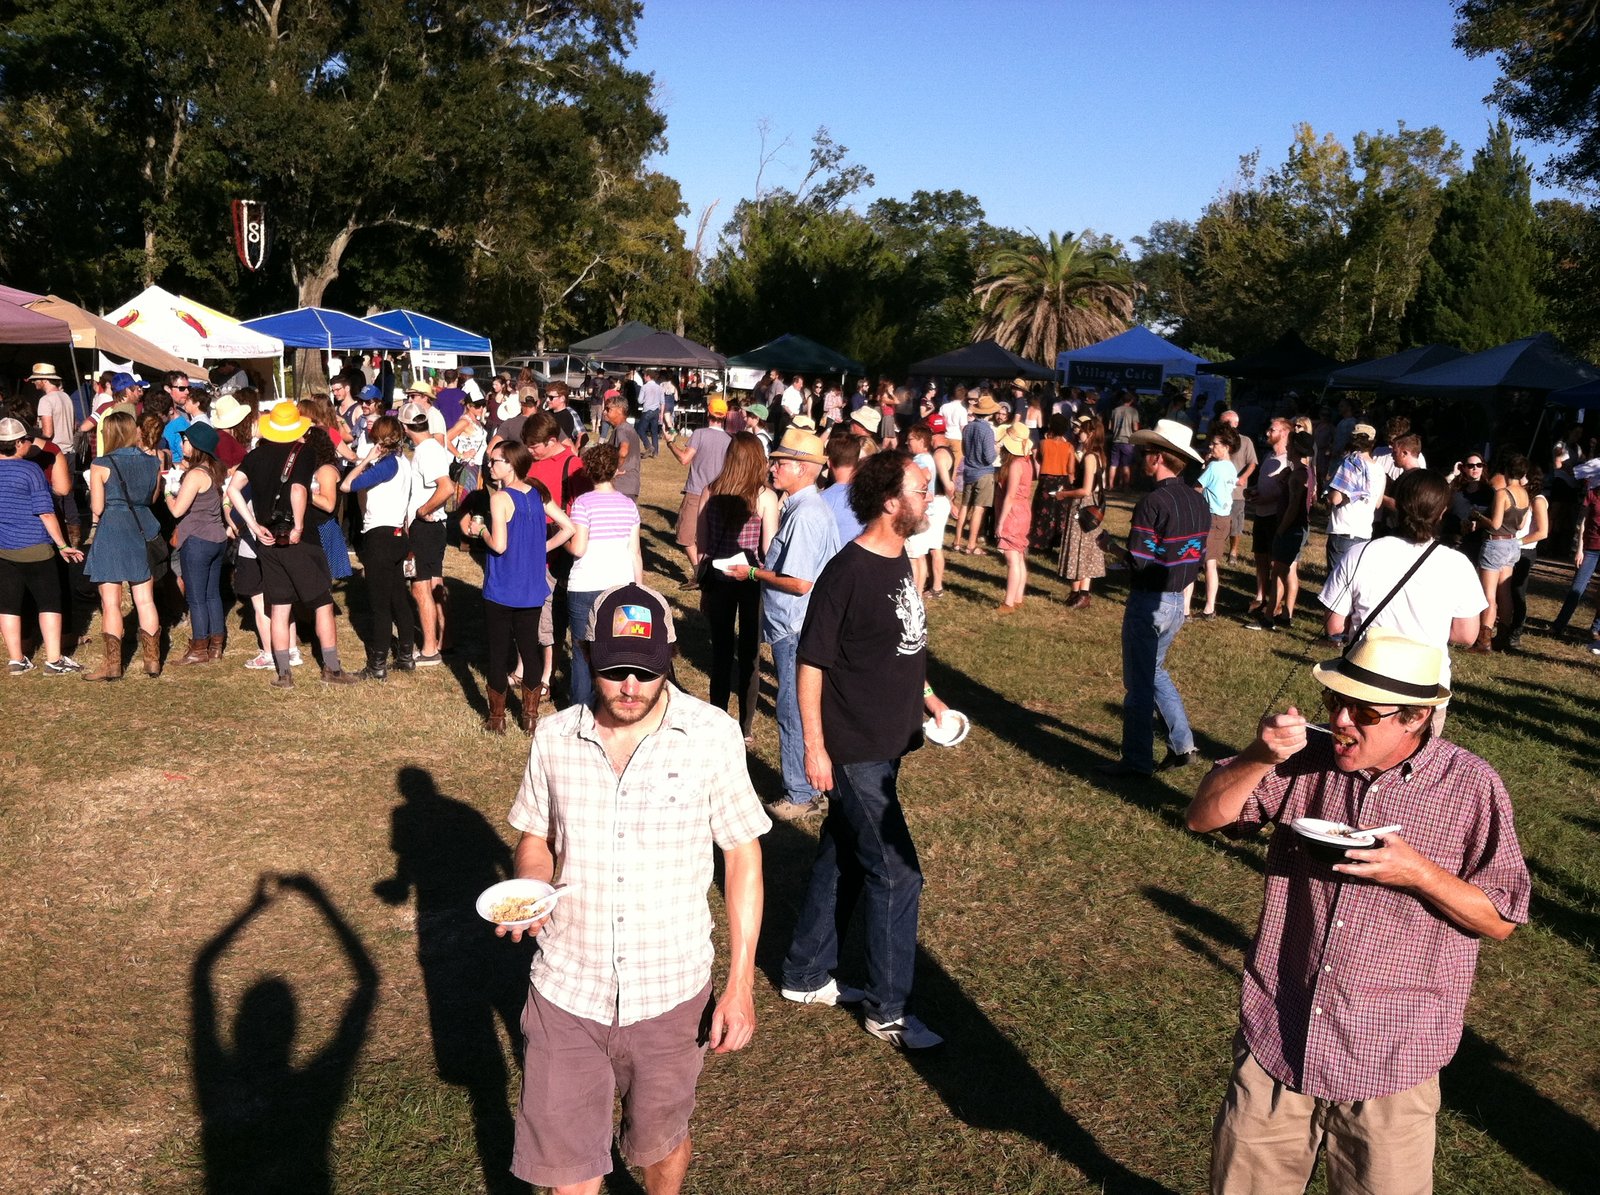 The afternoon crowd gets rowdy at the Blackpot Festival & Cookoff.